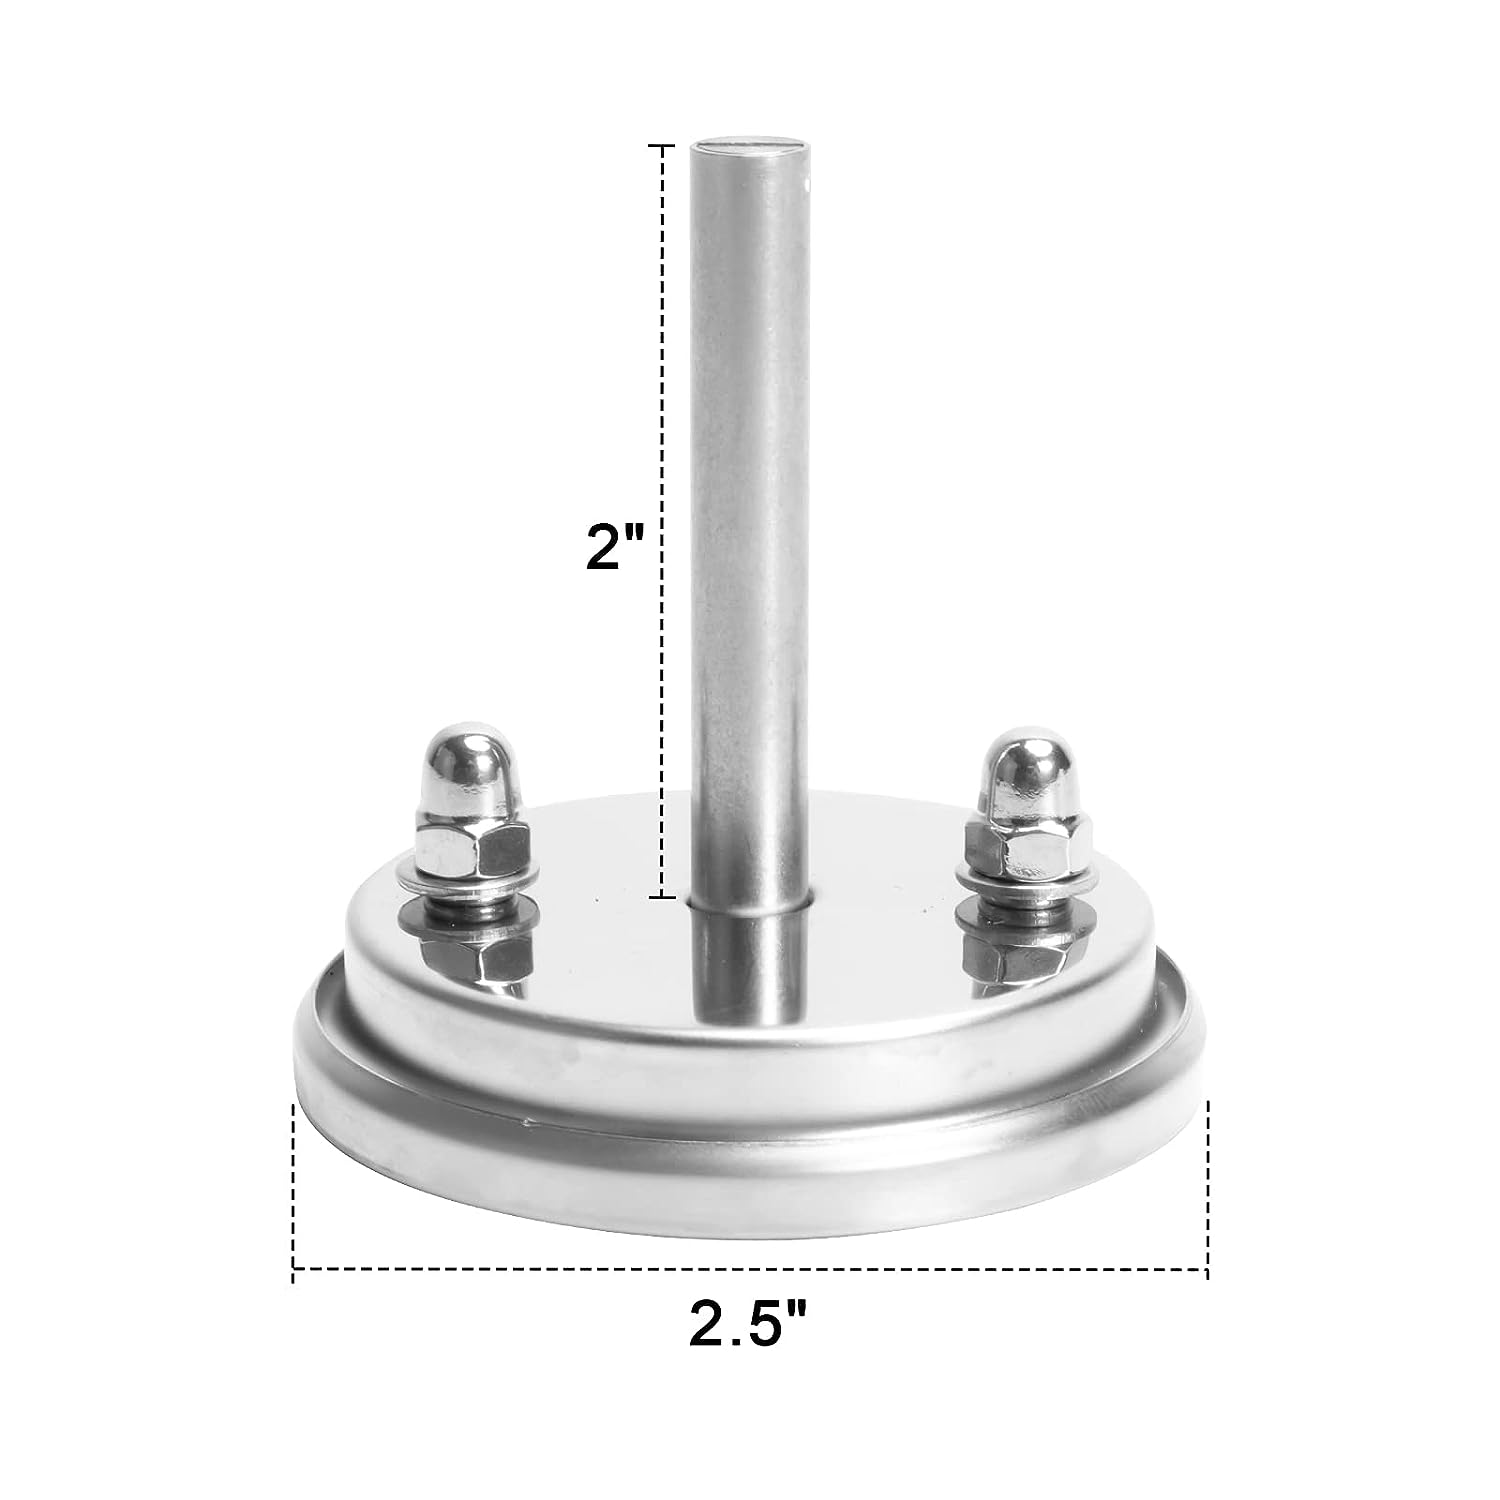 Lid Thermometer - Gas Grill Parts